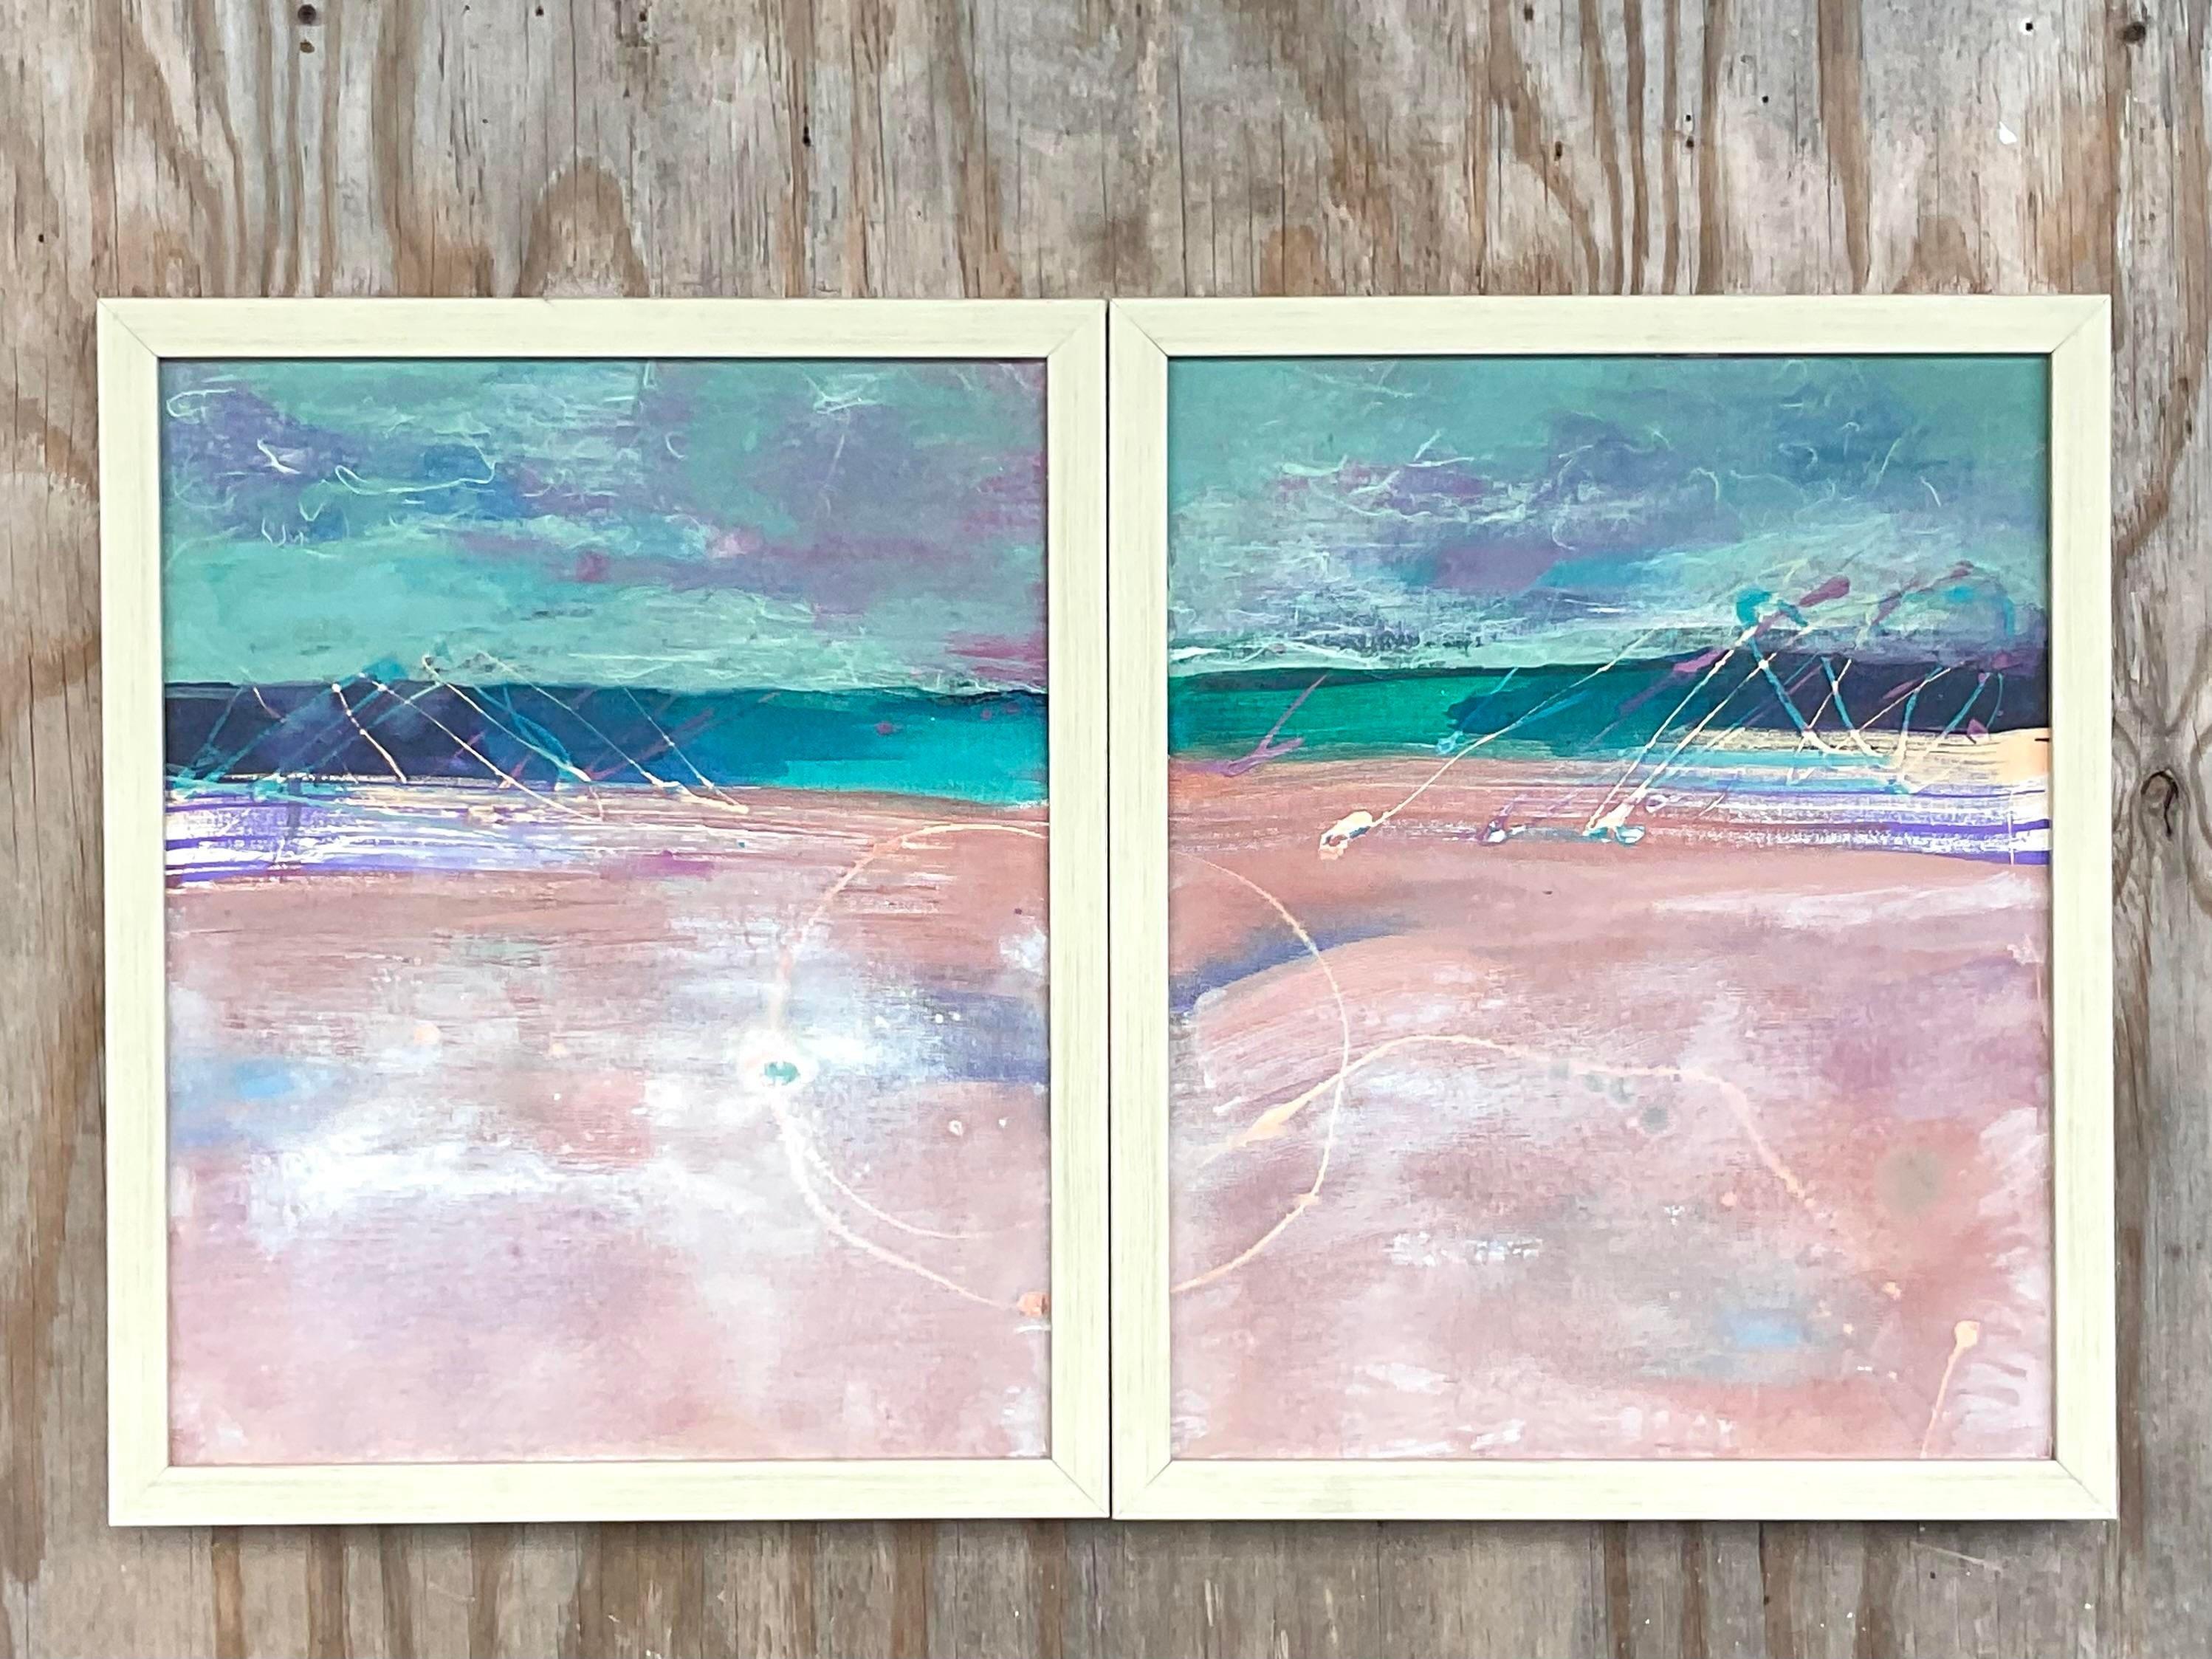 A fabulous set of two vintage Contemporary original Abstract oil paintings. A chic muted color composition with lots of good energy. Newly framed. Acquired from a Palm Beach estate.